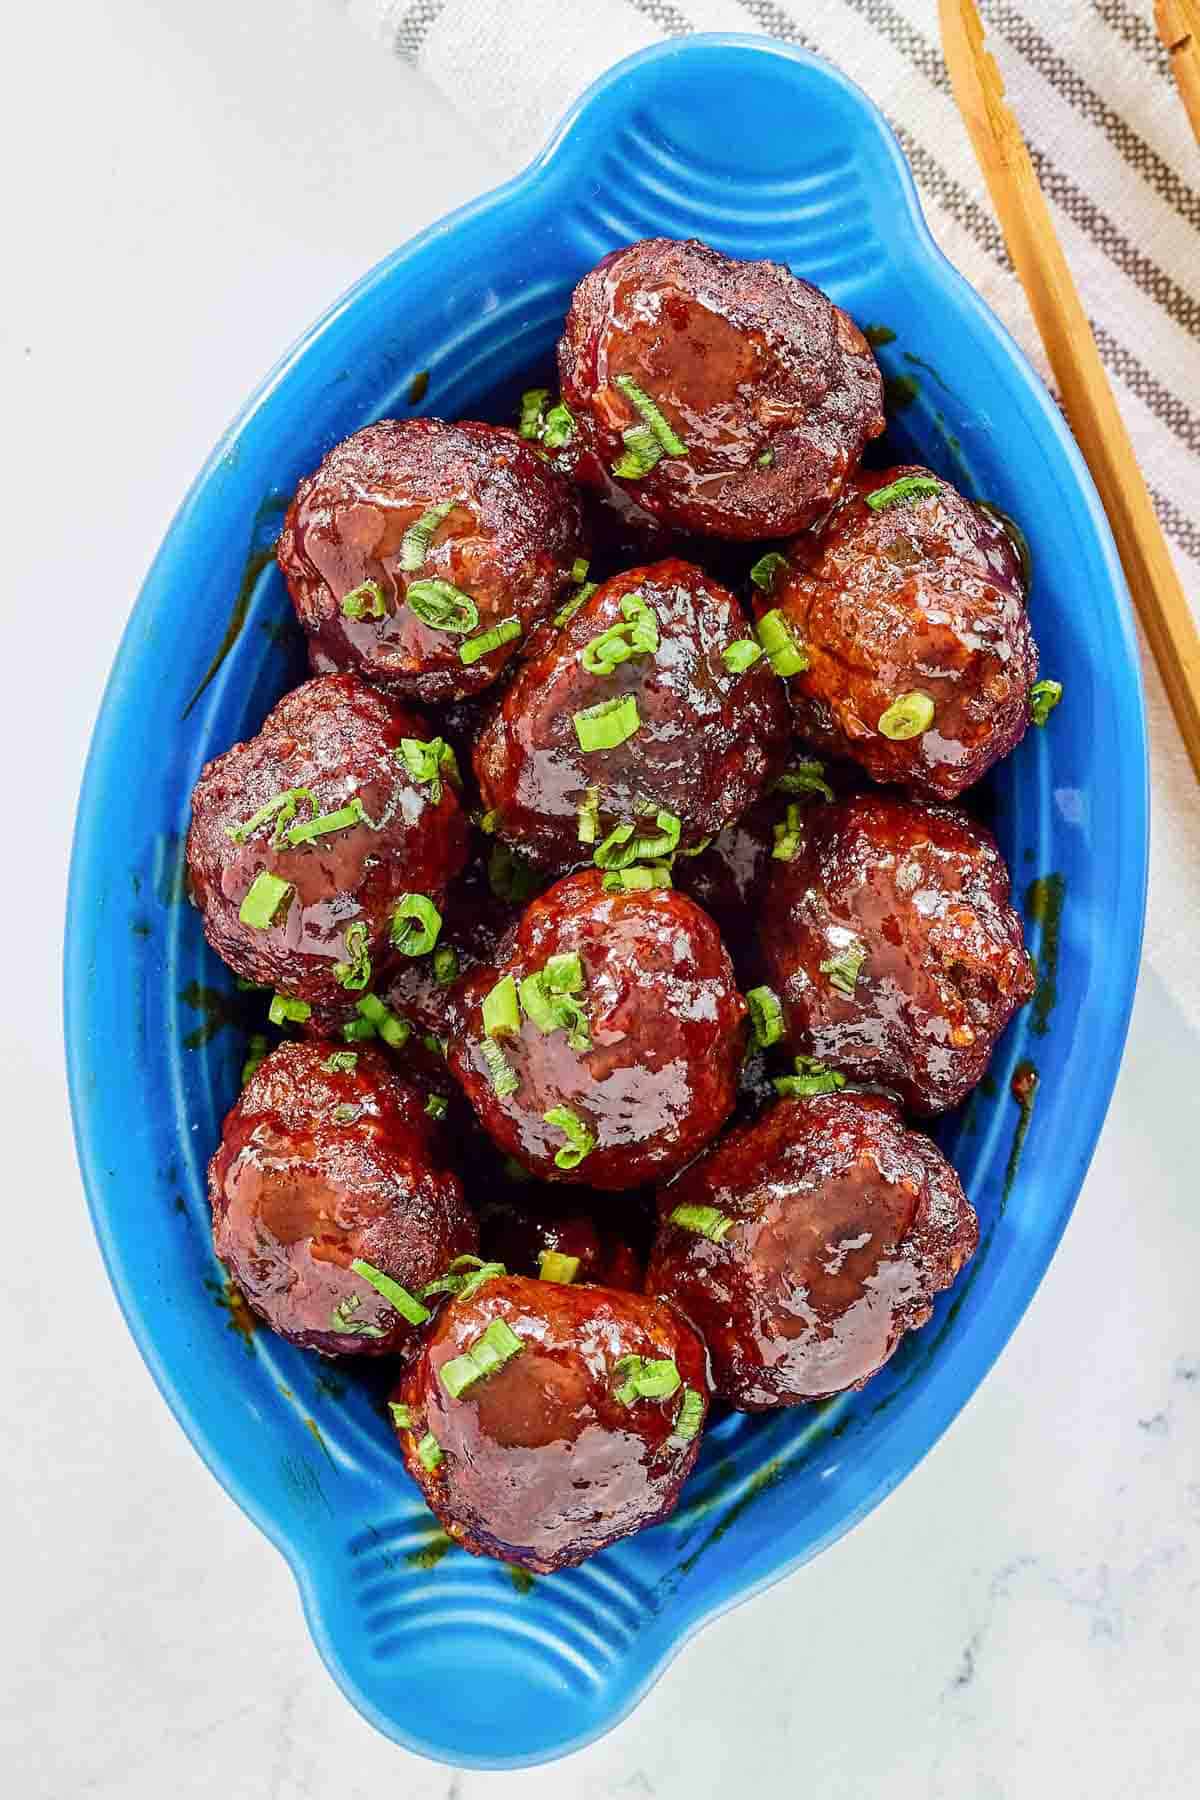 Homemade BBQ meatballs garnished with sliced green onions.